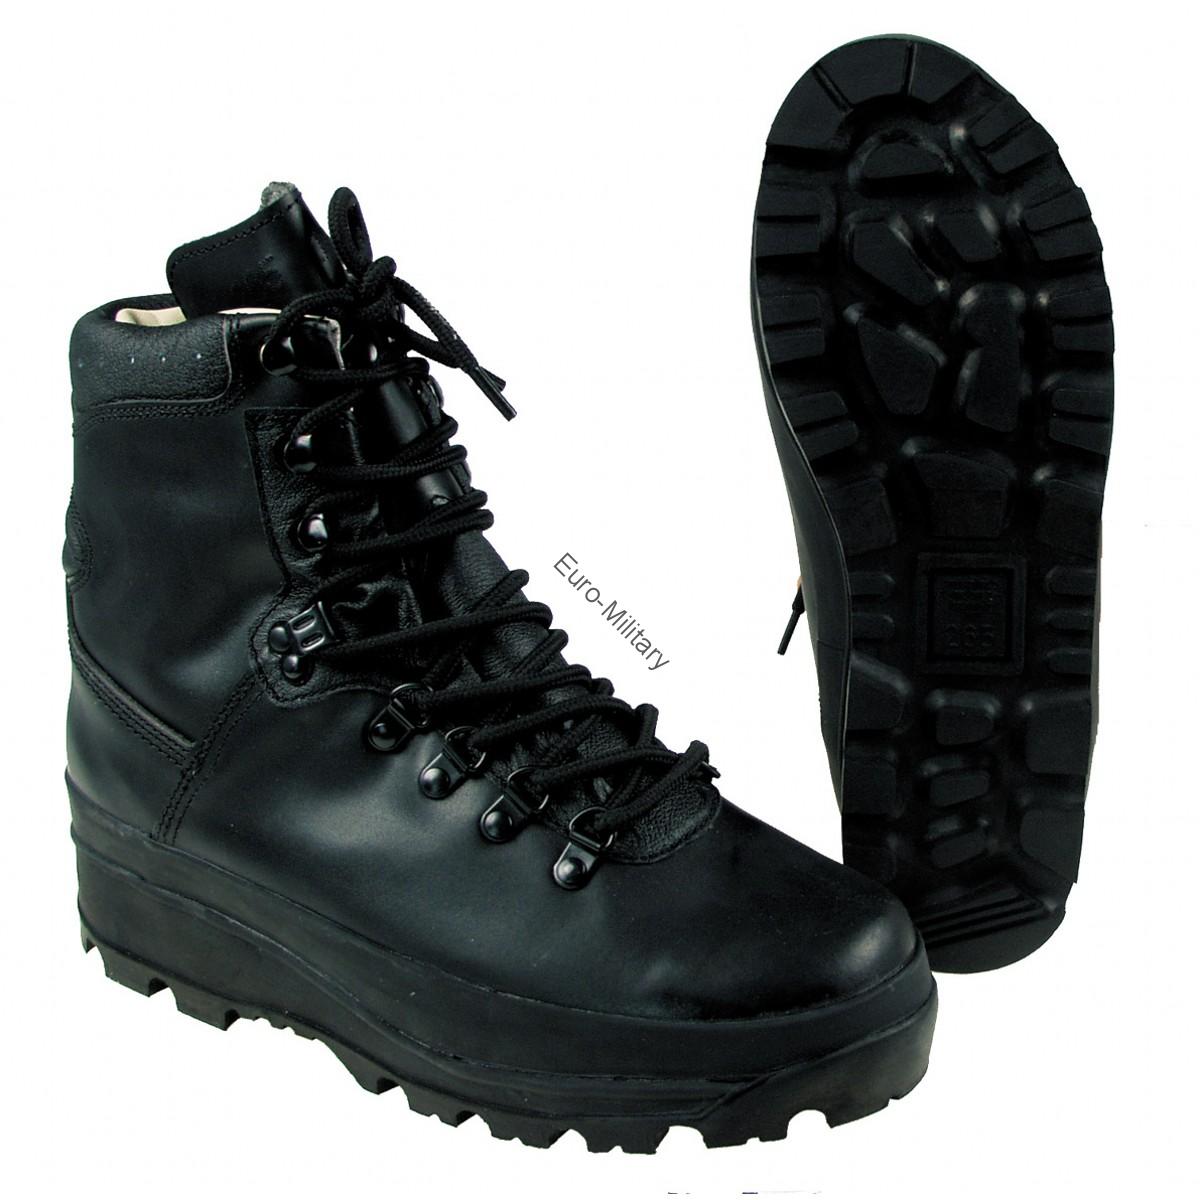 BW German Army Mountain Durable Waterproof Boots Breathtex Lining - Black